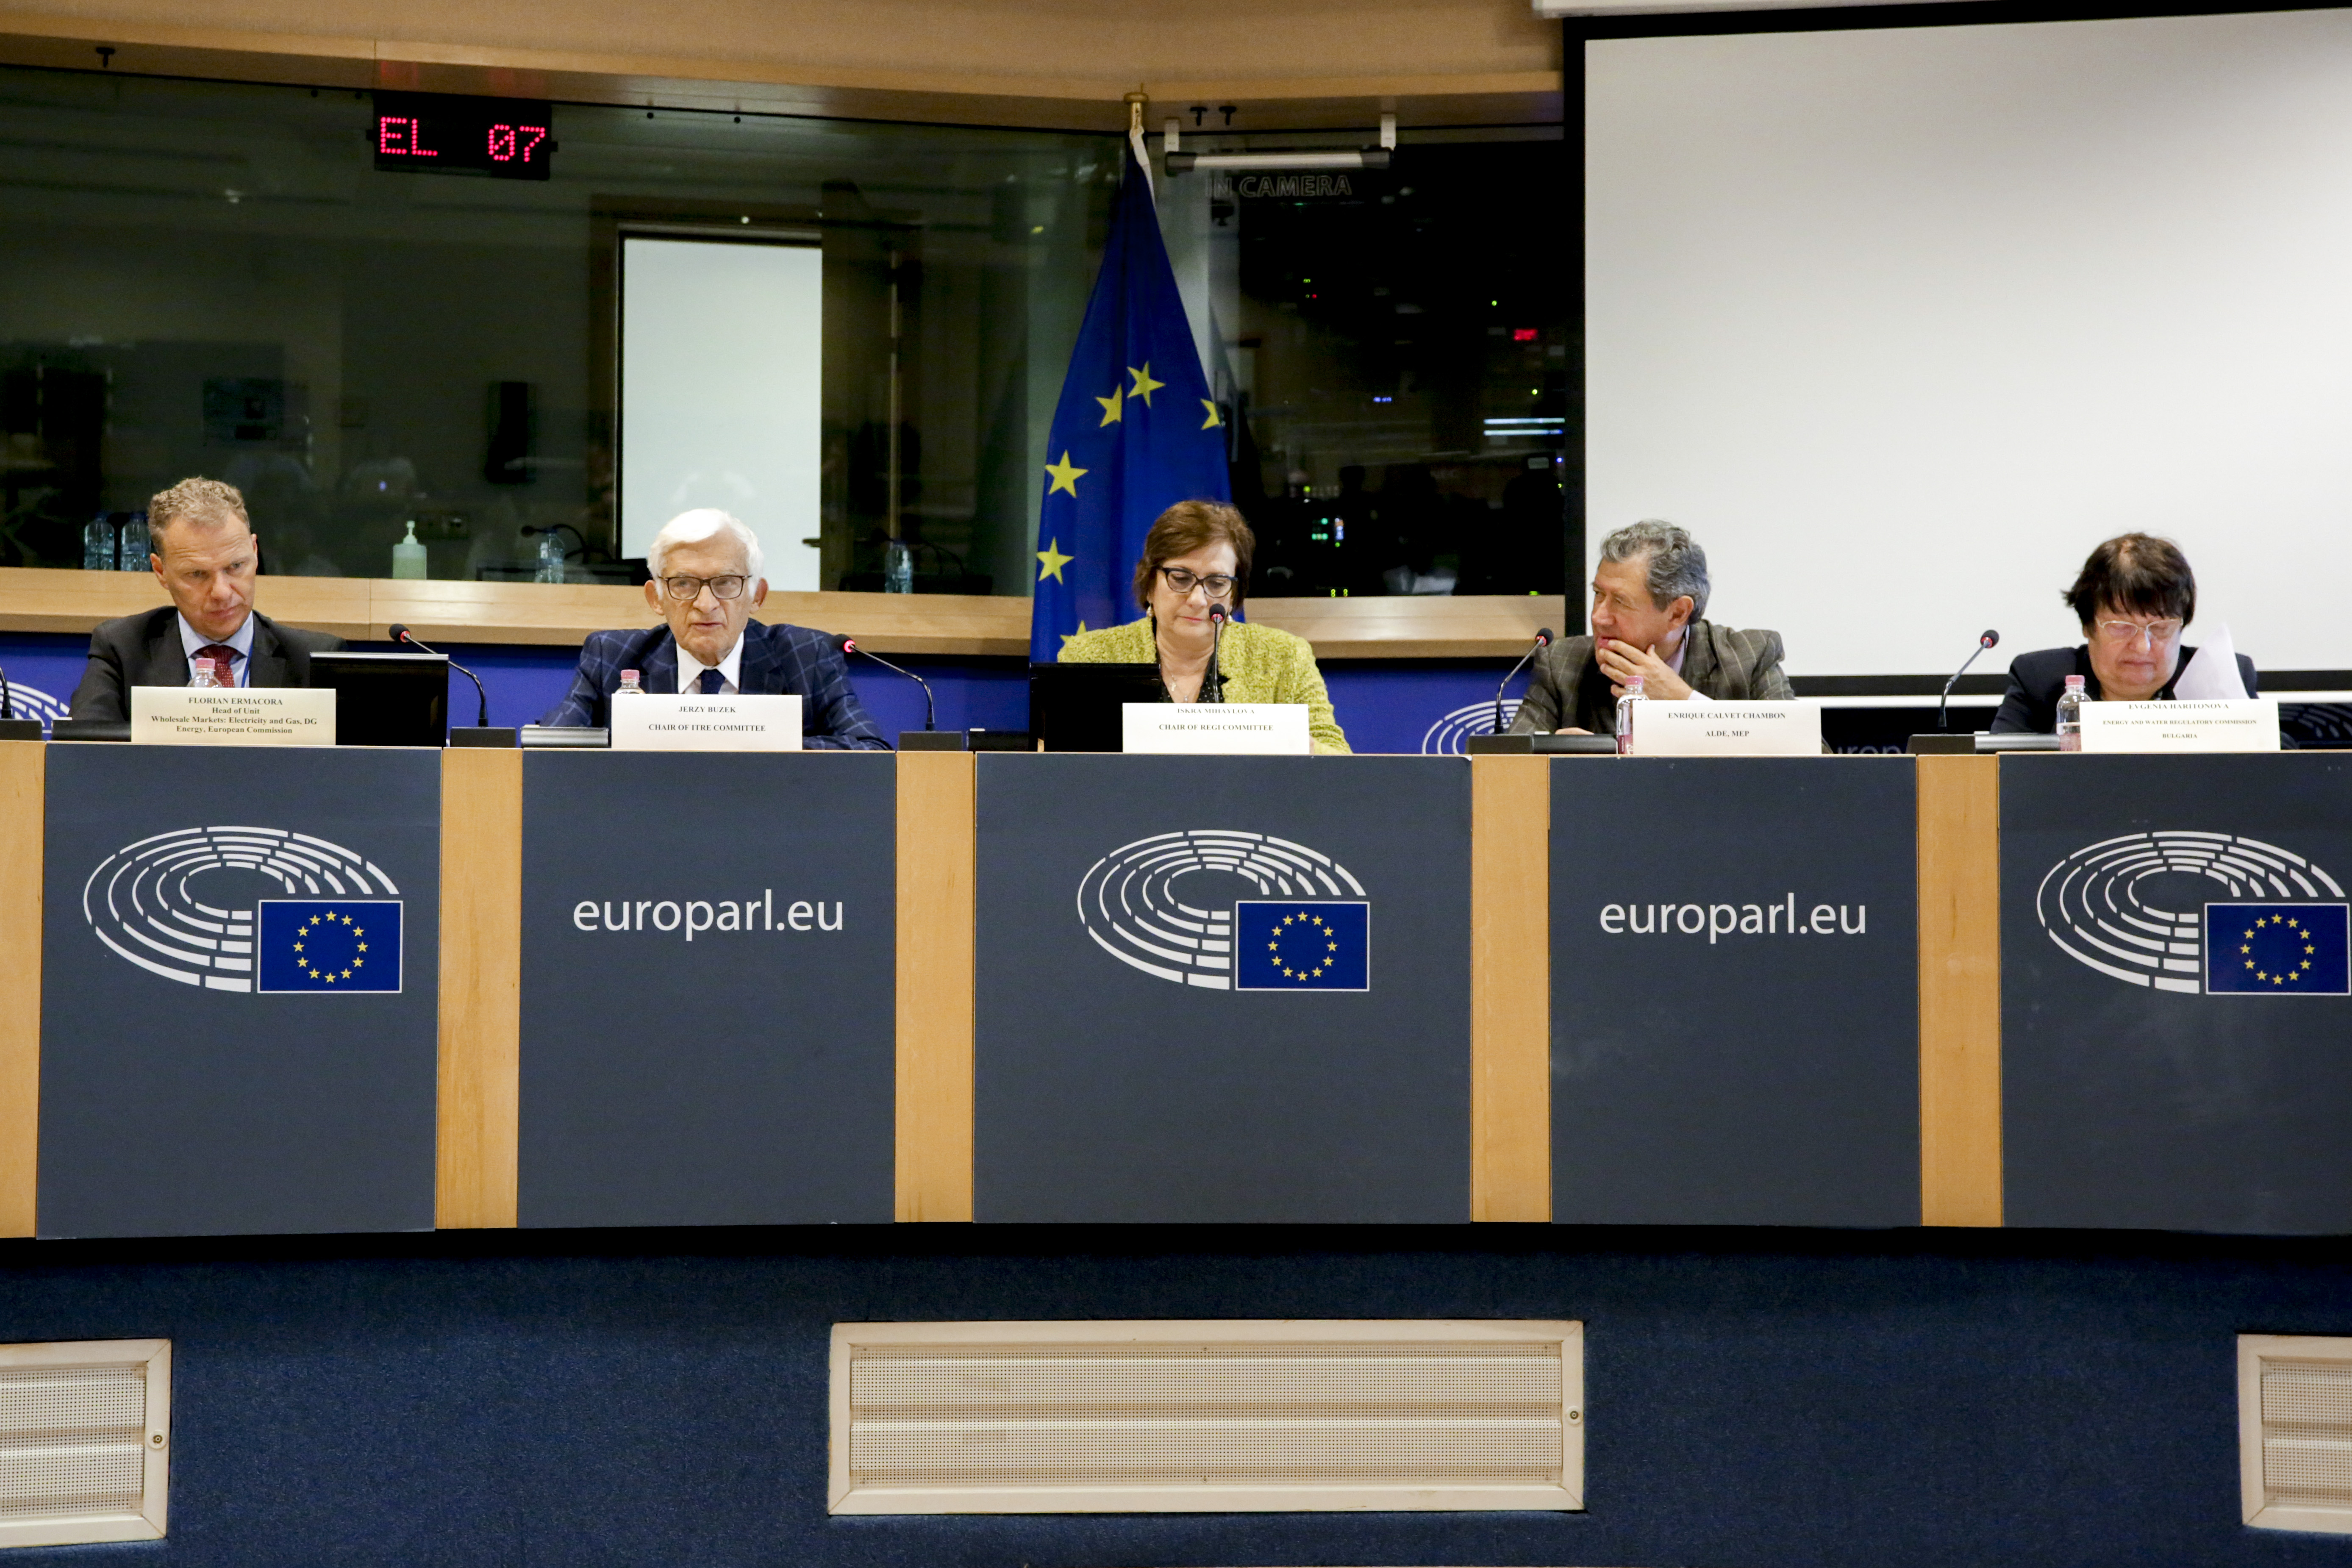 EWRC DELEGATION PARTICIPATED IN THE CONFERENCE ON THE ROLE of NATIONAL REGULATORY AUTHORITIES IN THE EU ENERGY MARKET AFTER 2020 HELD IN THE EUROPEAN PARLIAMENT